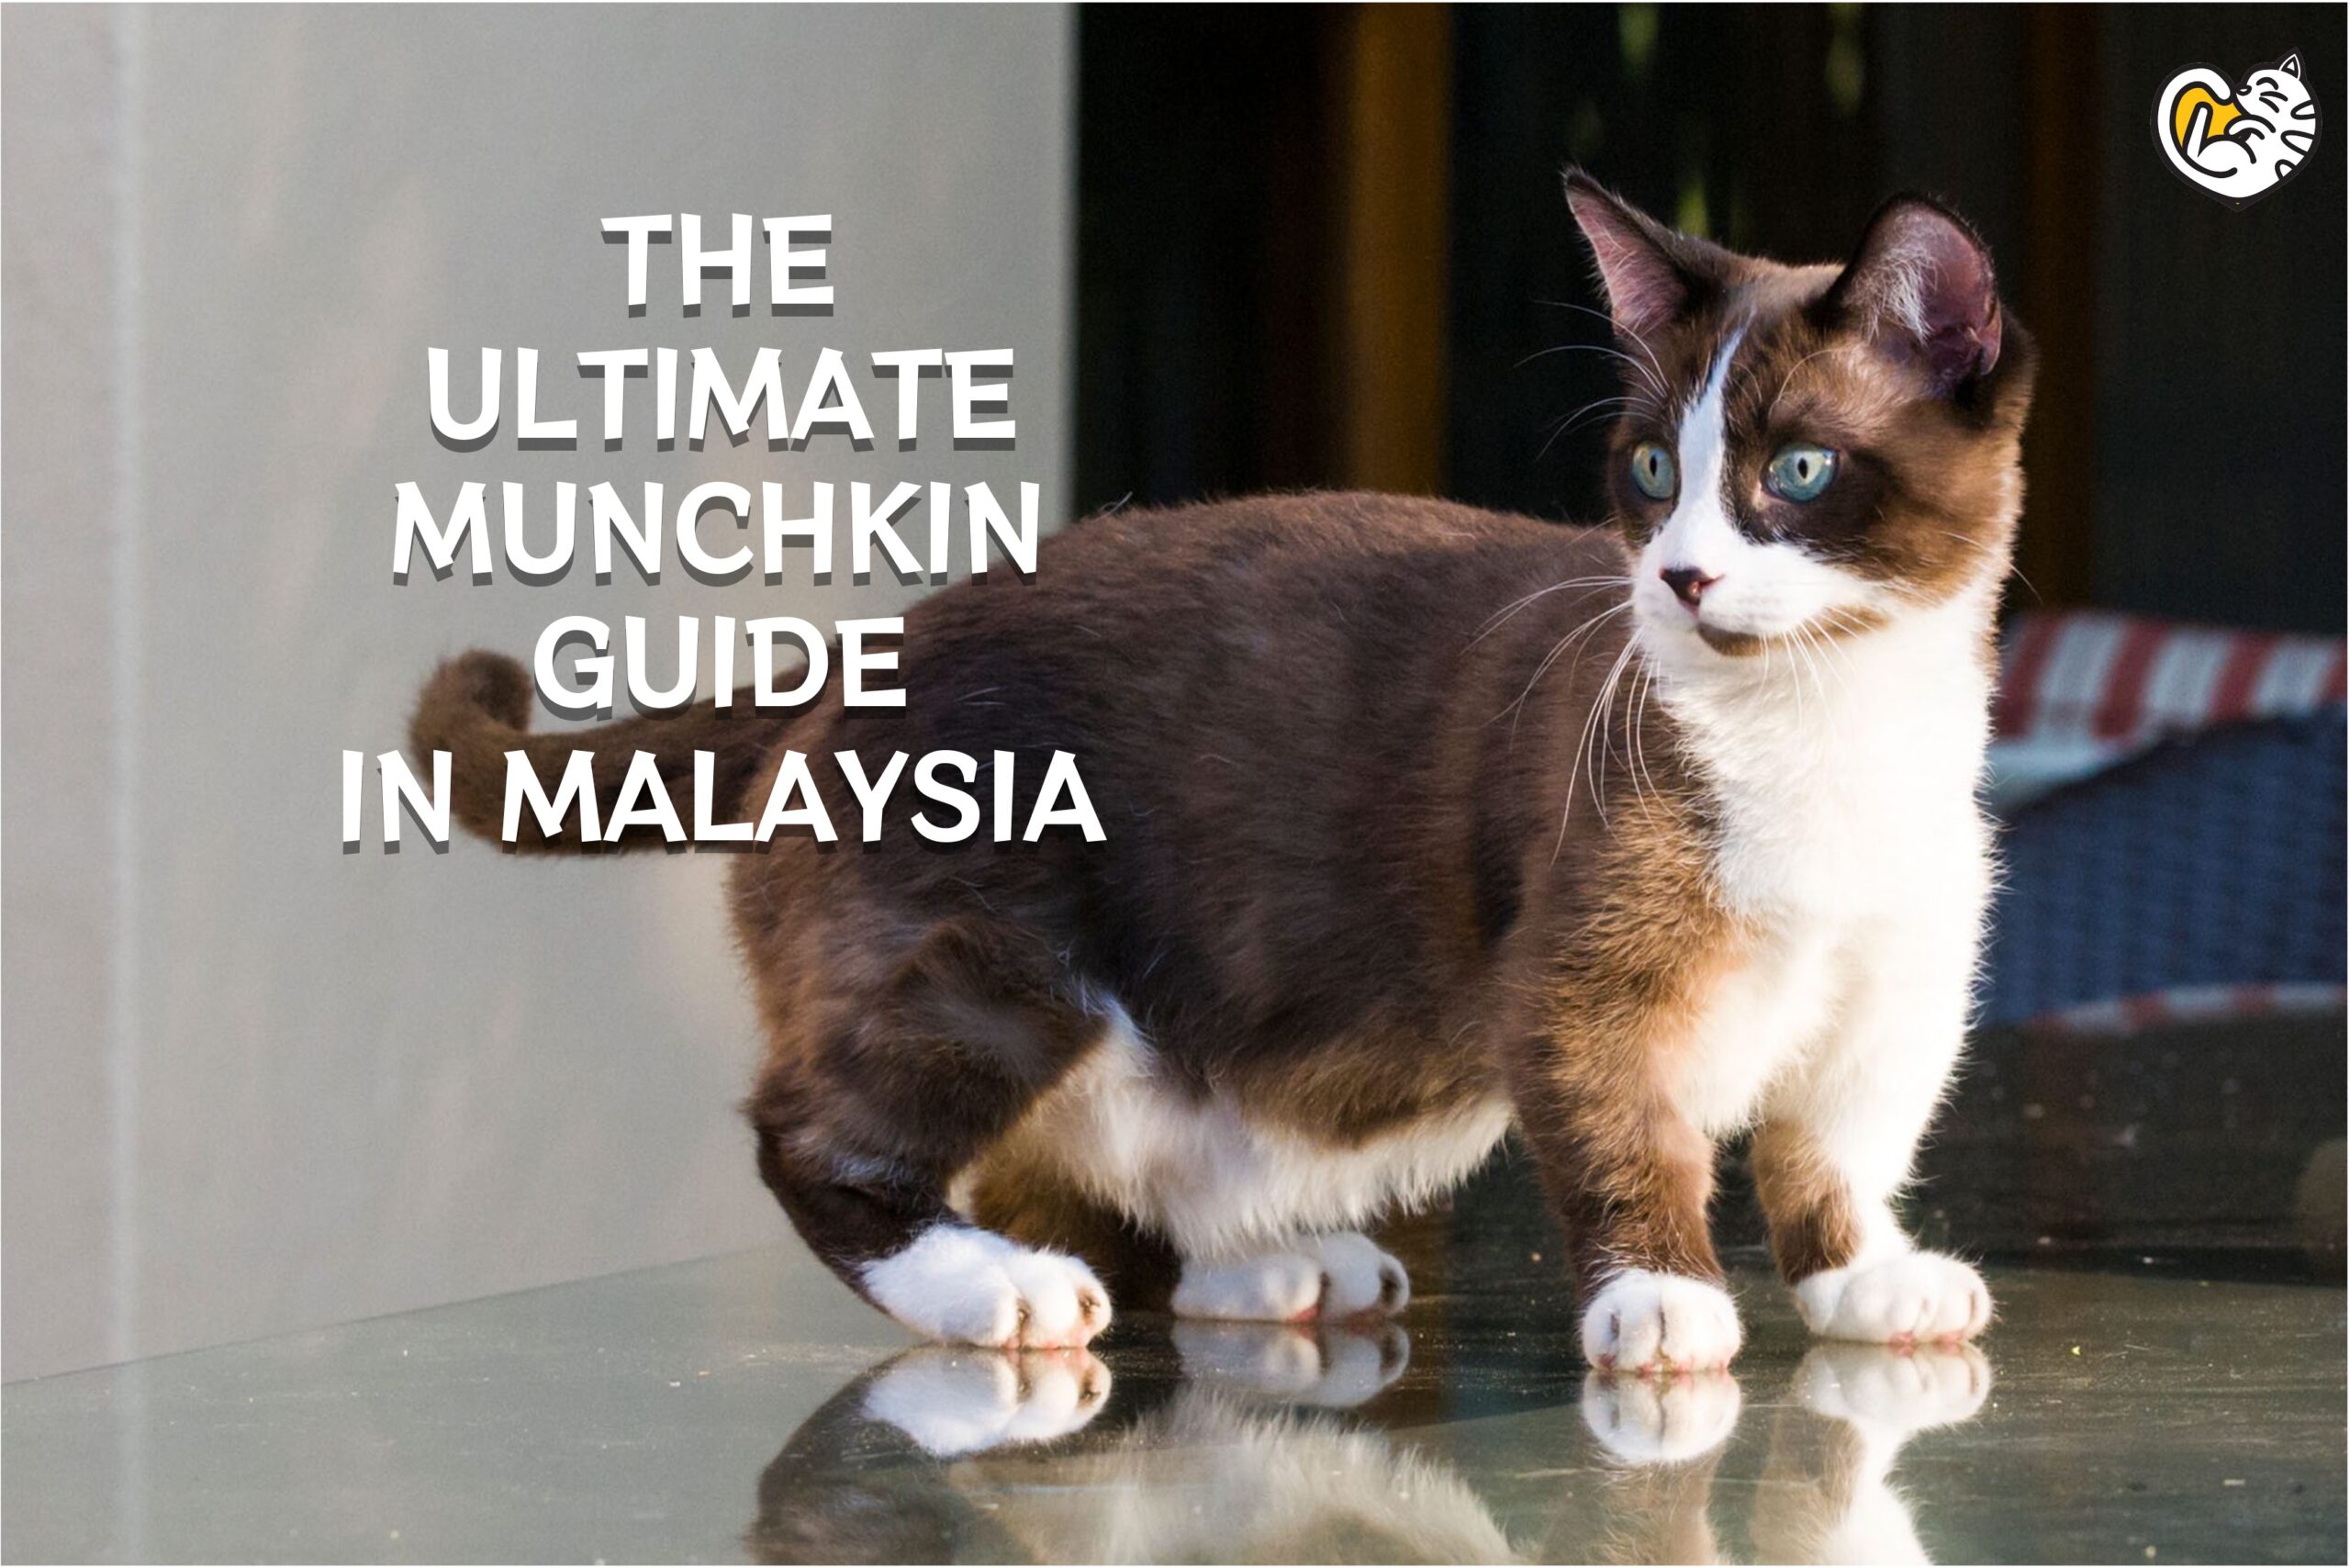 The Ultimate Munchkin Guide in Malaysia (Credit Image: Michael Beder / Getty Images)